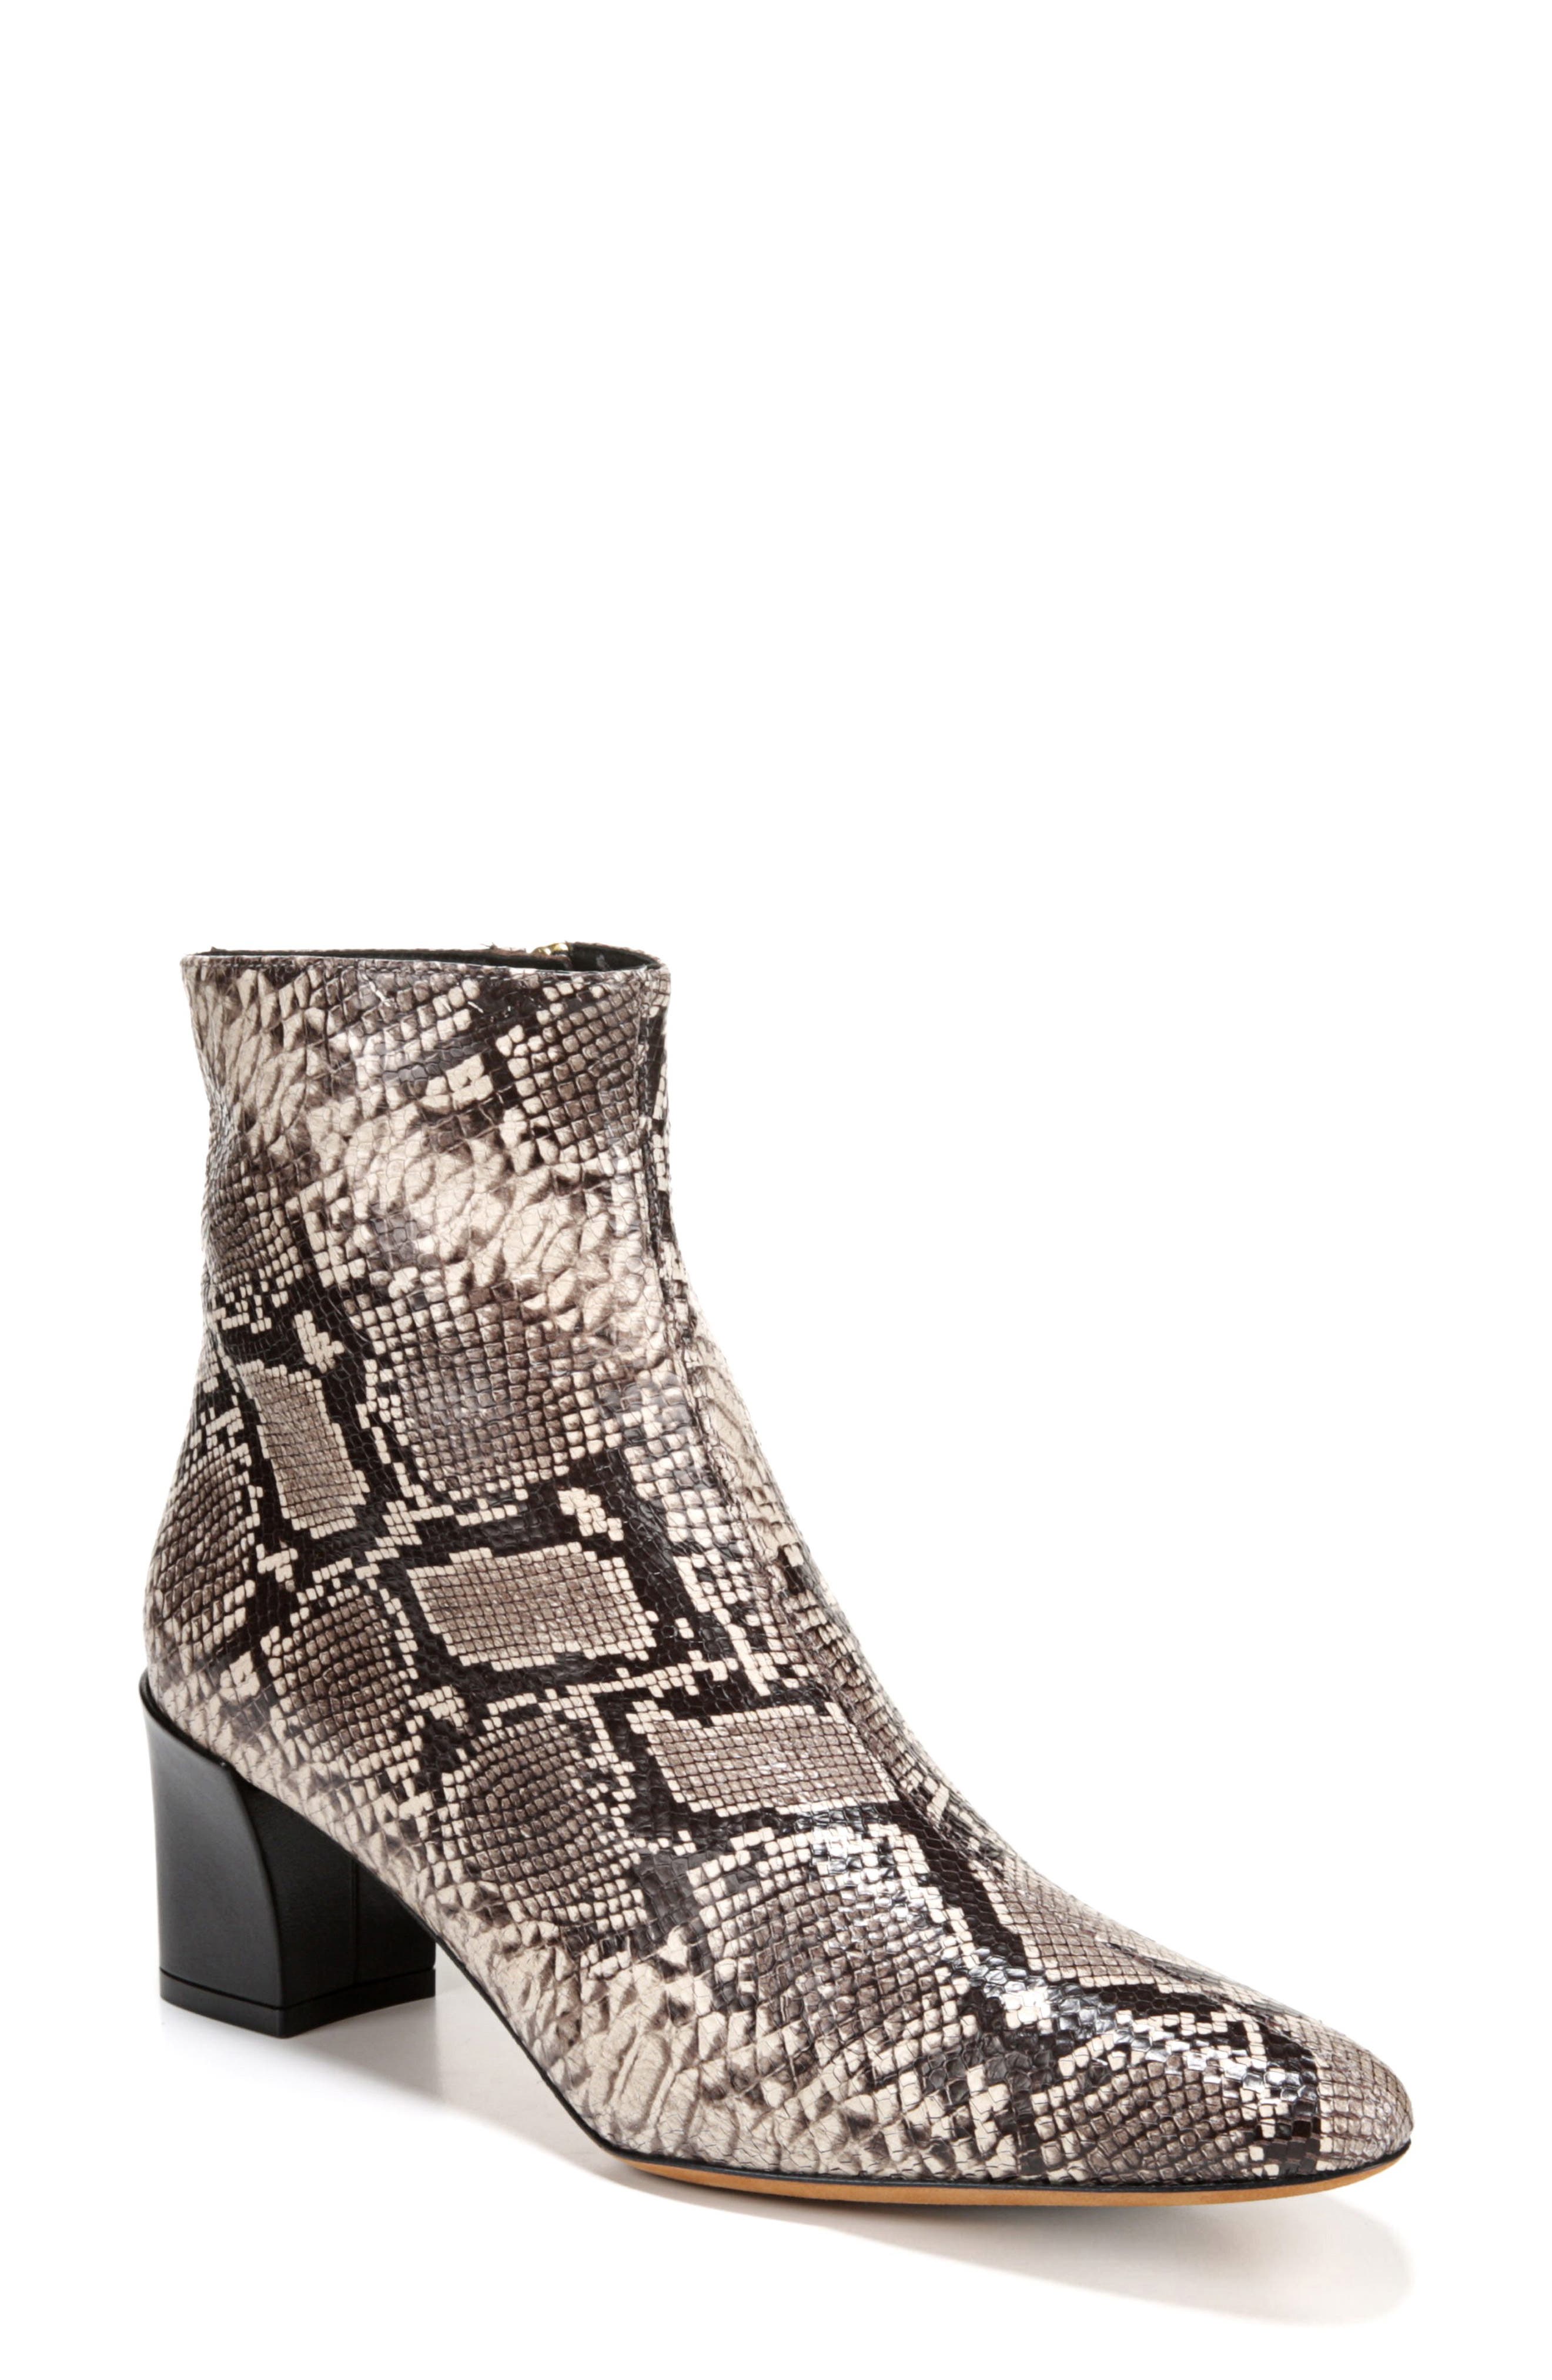 Vince | Lanica Snake Embossed Leather 